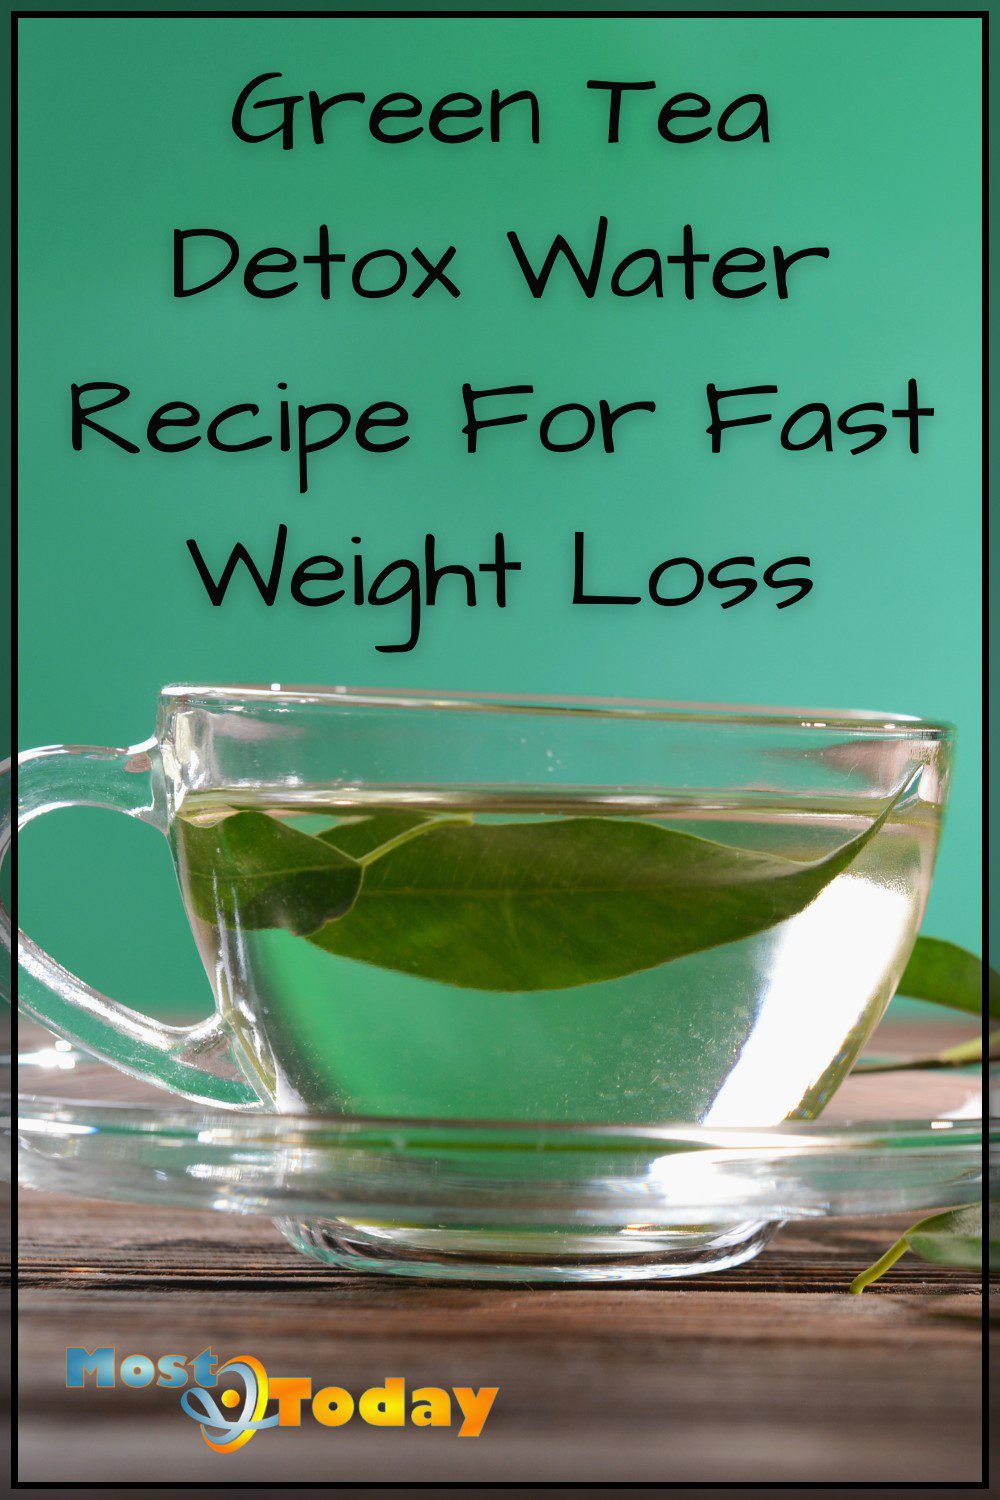 Green Tea Detox Water Recipe For Fast Weight Loss